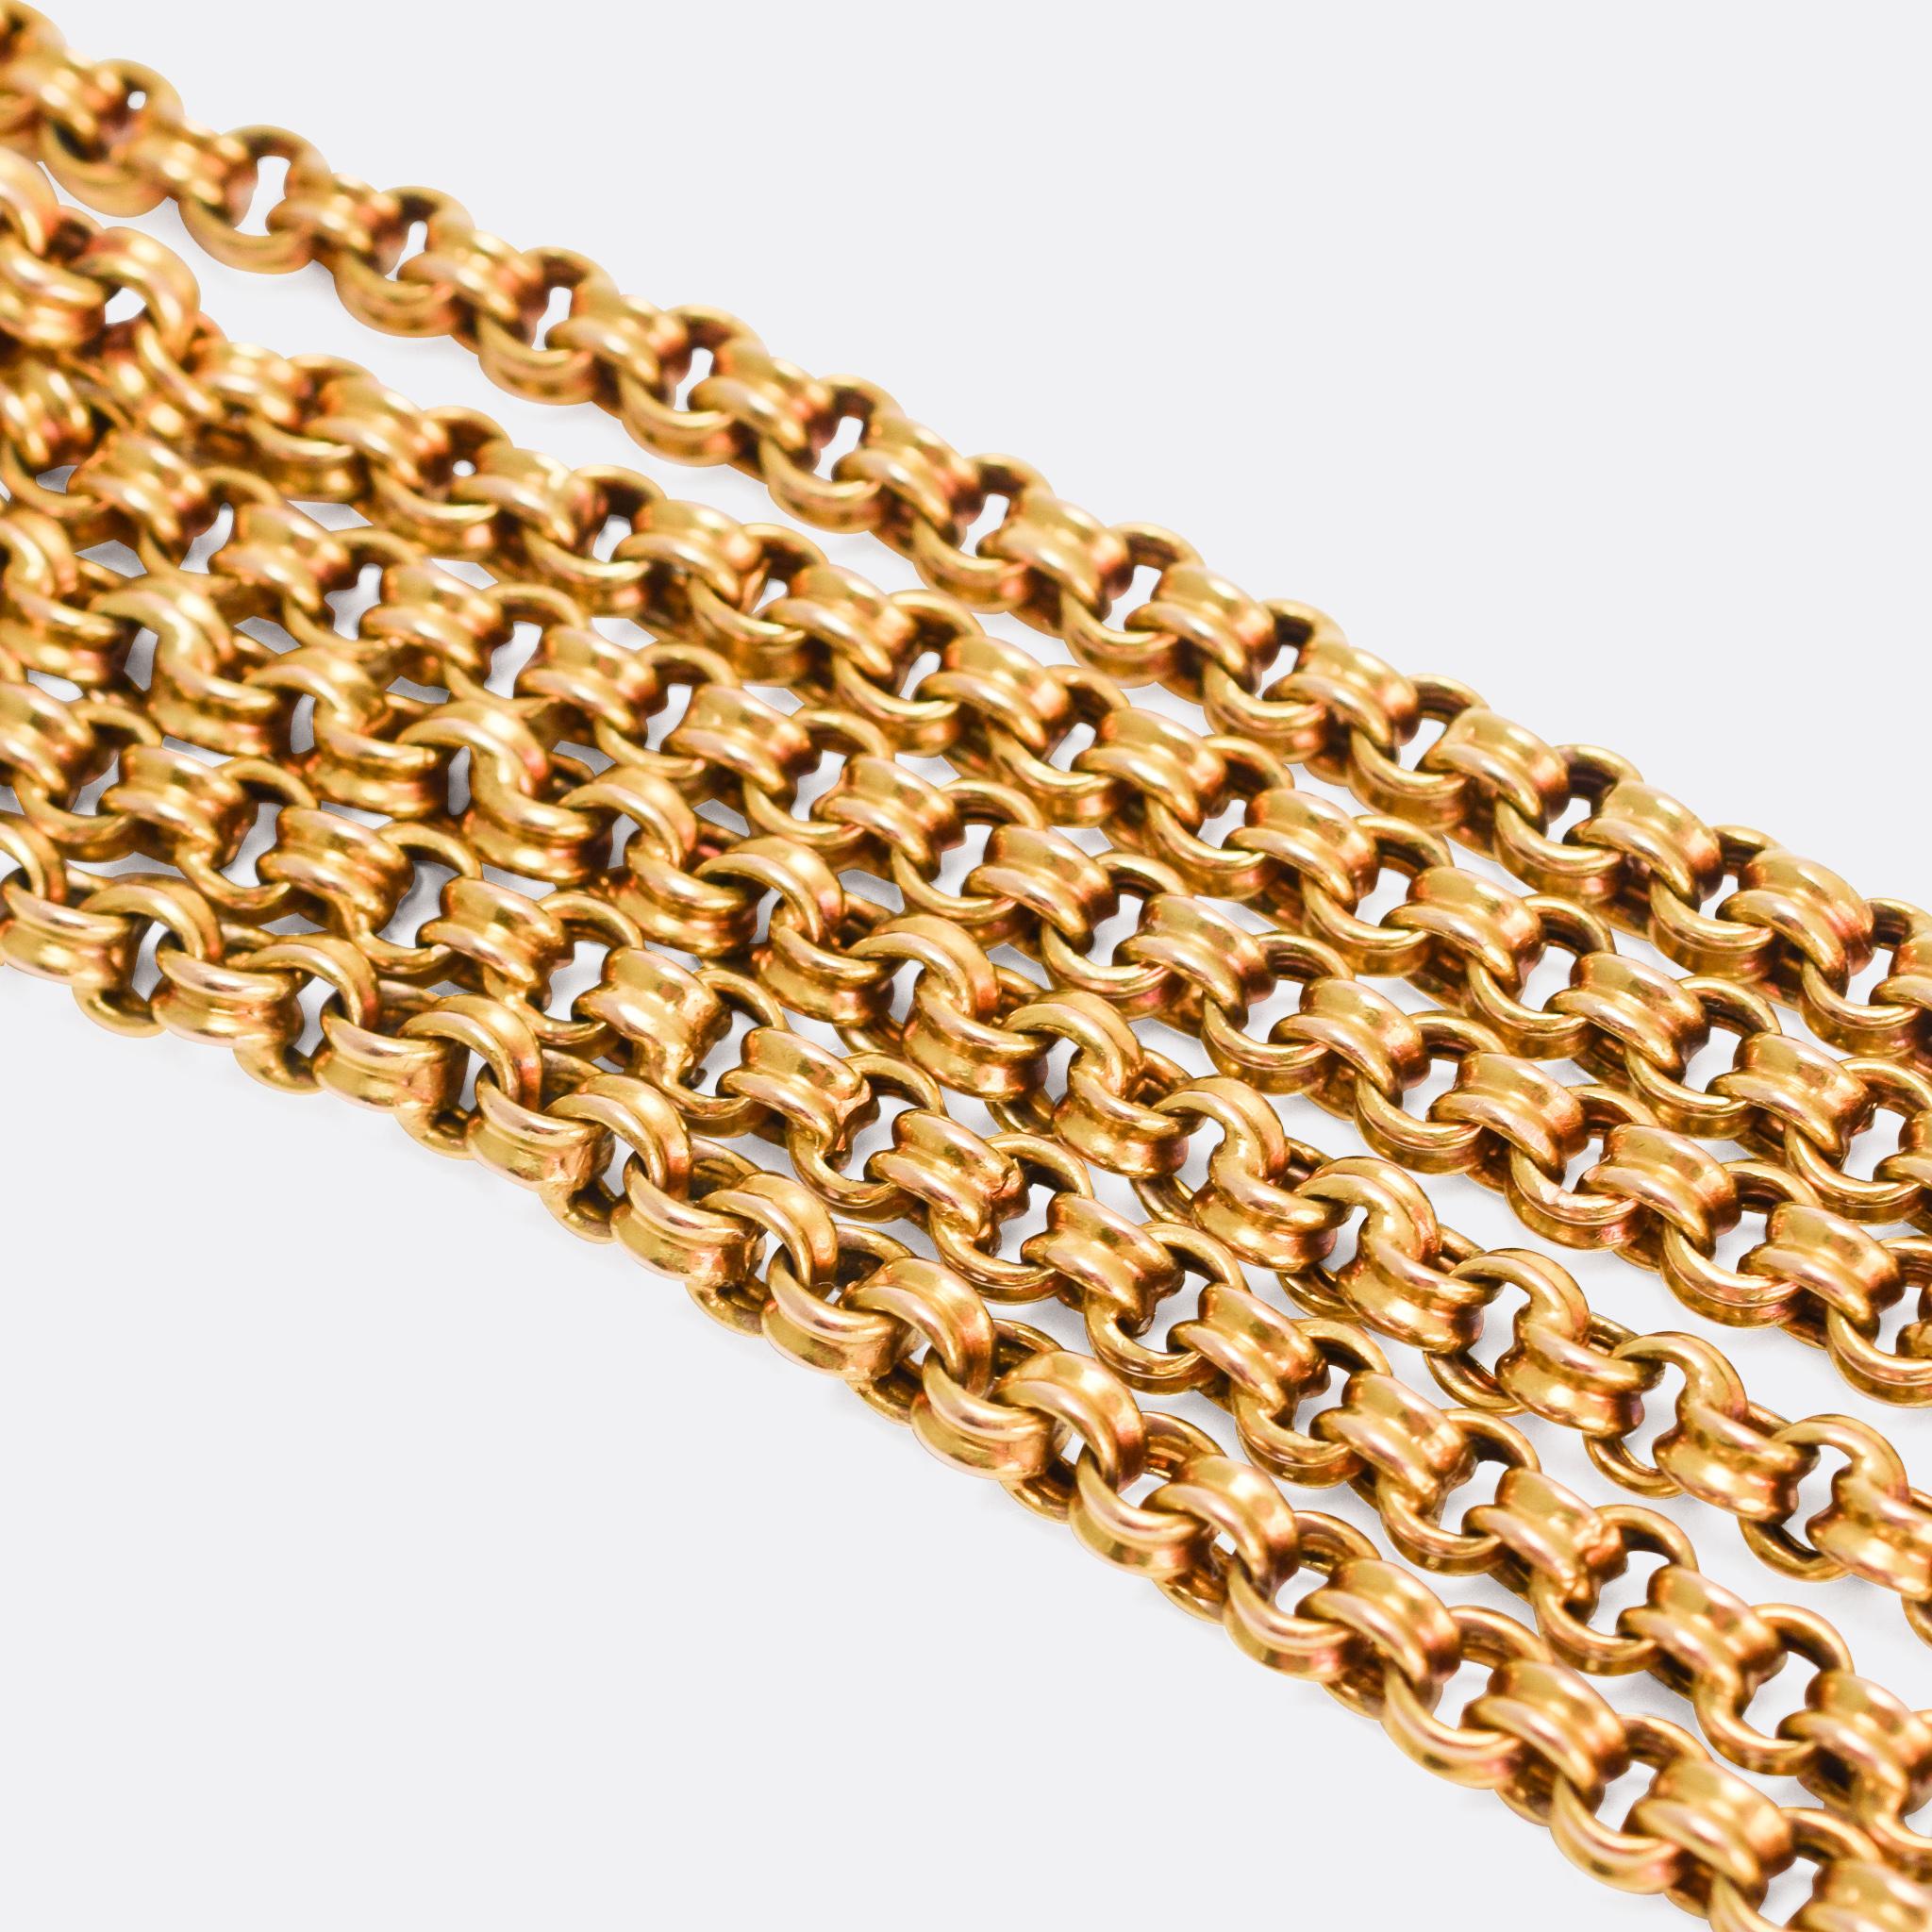 A splendid 15 karat gold guard chain dating from the late Victorian era. At 64 inches in length, and with fancy belcher links, it's a particularly nice example.

MEASUREMENTS 
Length: 64 inches

WEIGHT 
63.8g

MARKS 
Stamped 15k gold
J M Maker's Mark